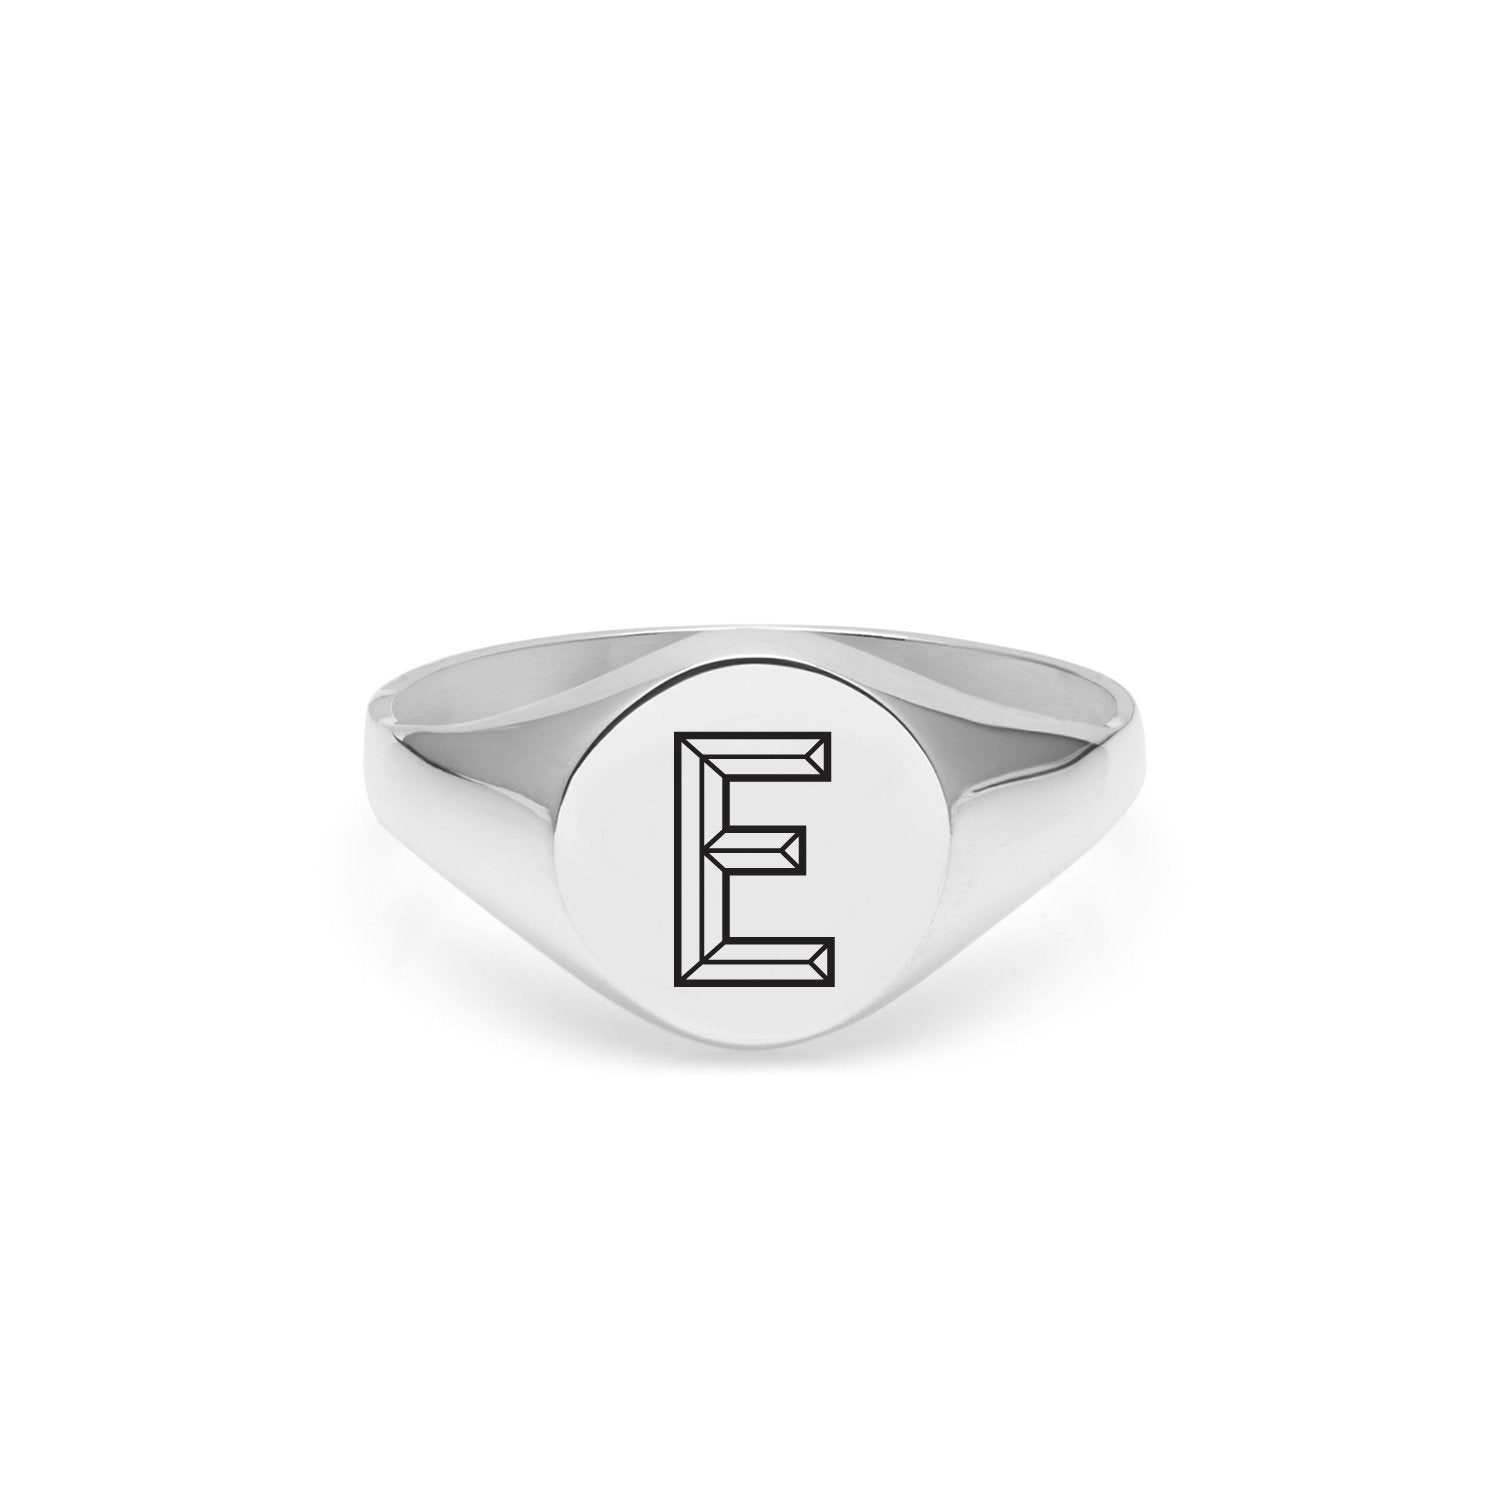 Facett Initial E Round Signet Ring - Silver - Myia Bonner Jewellery